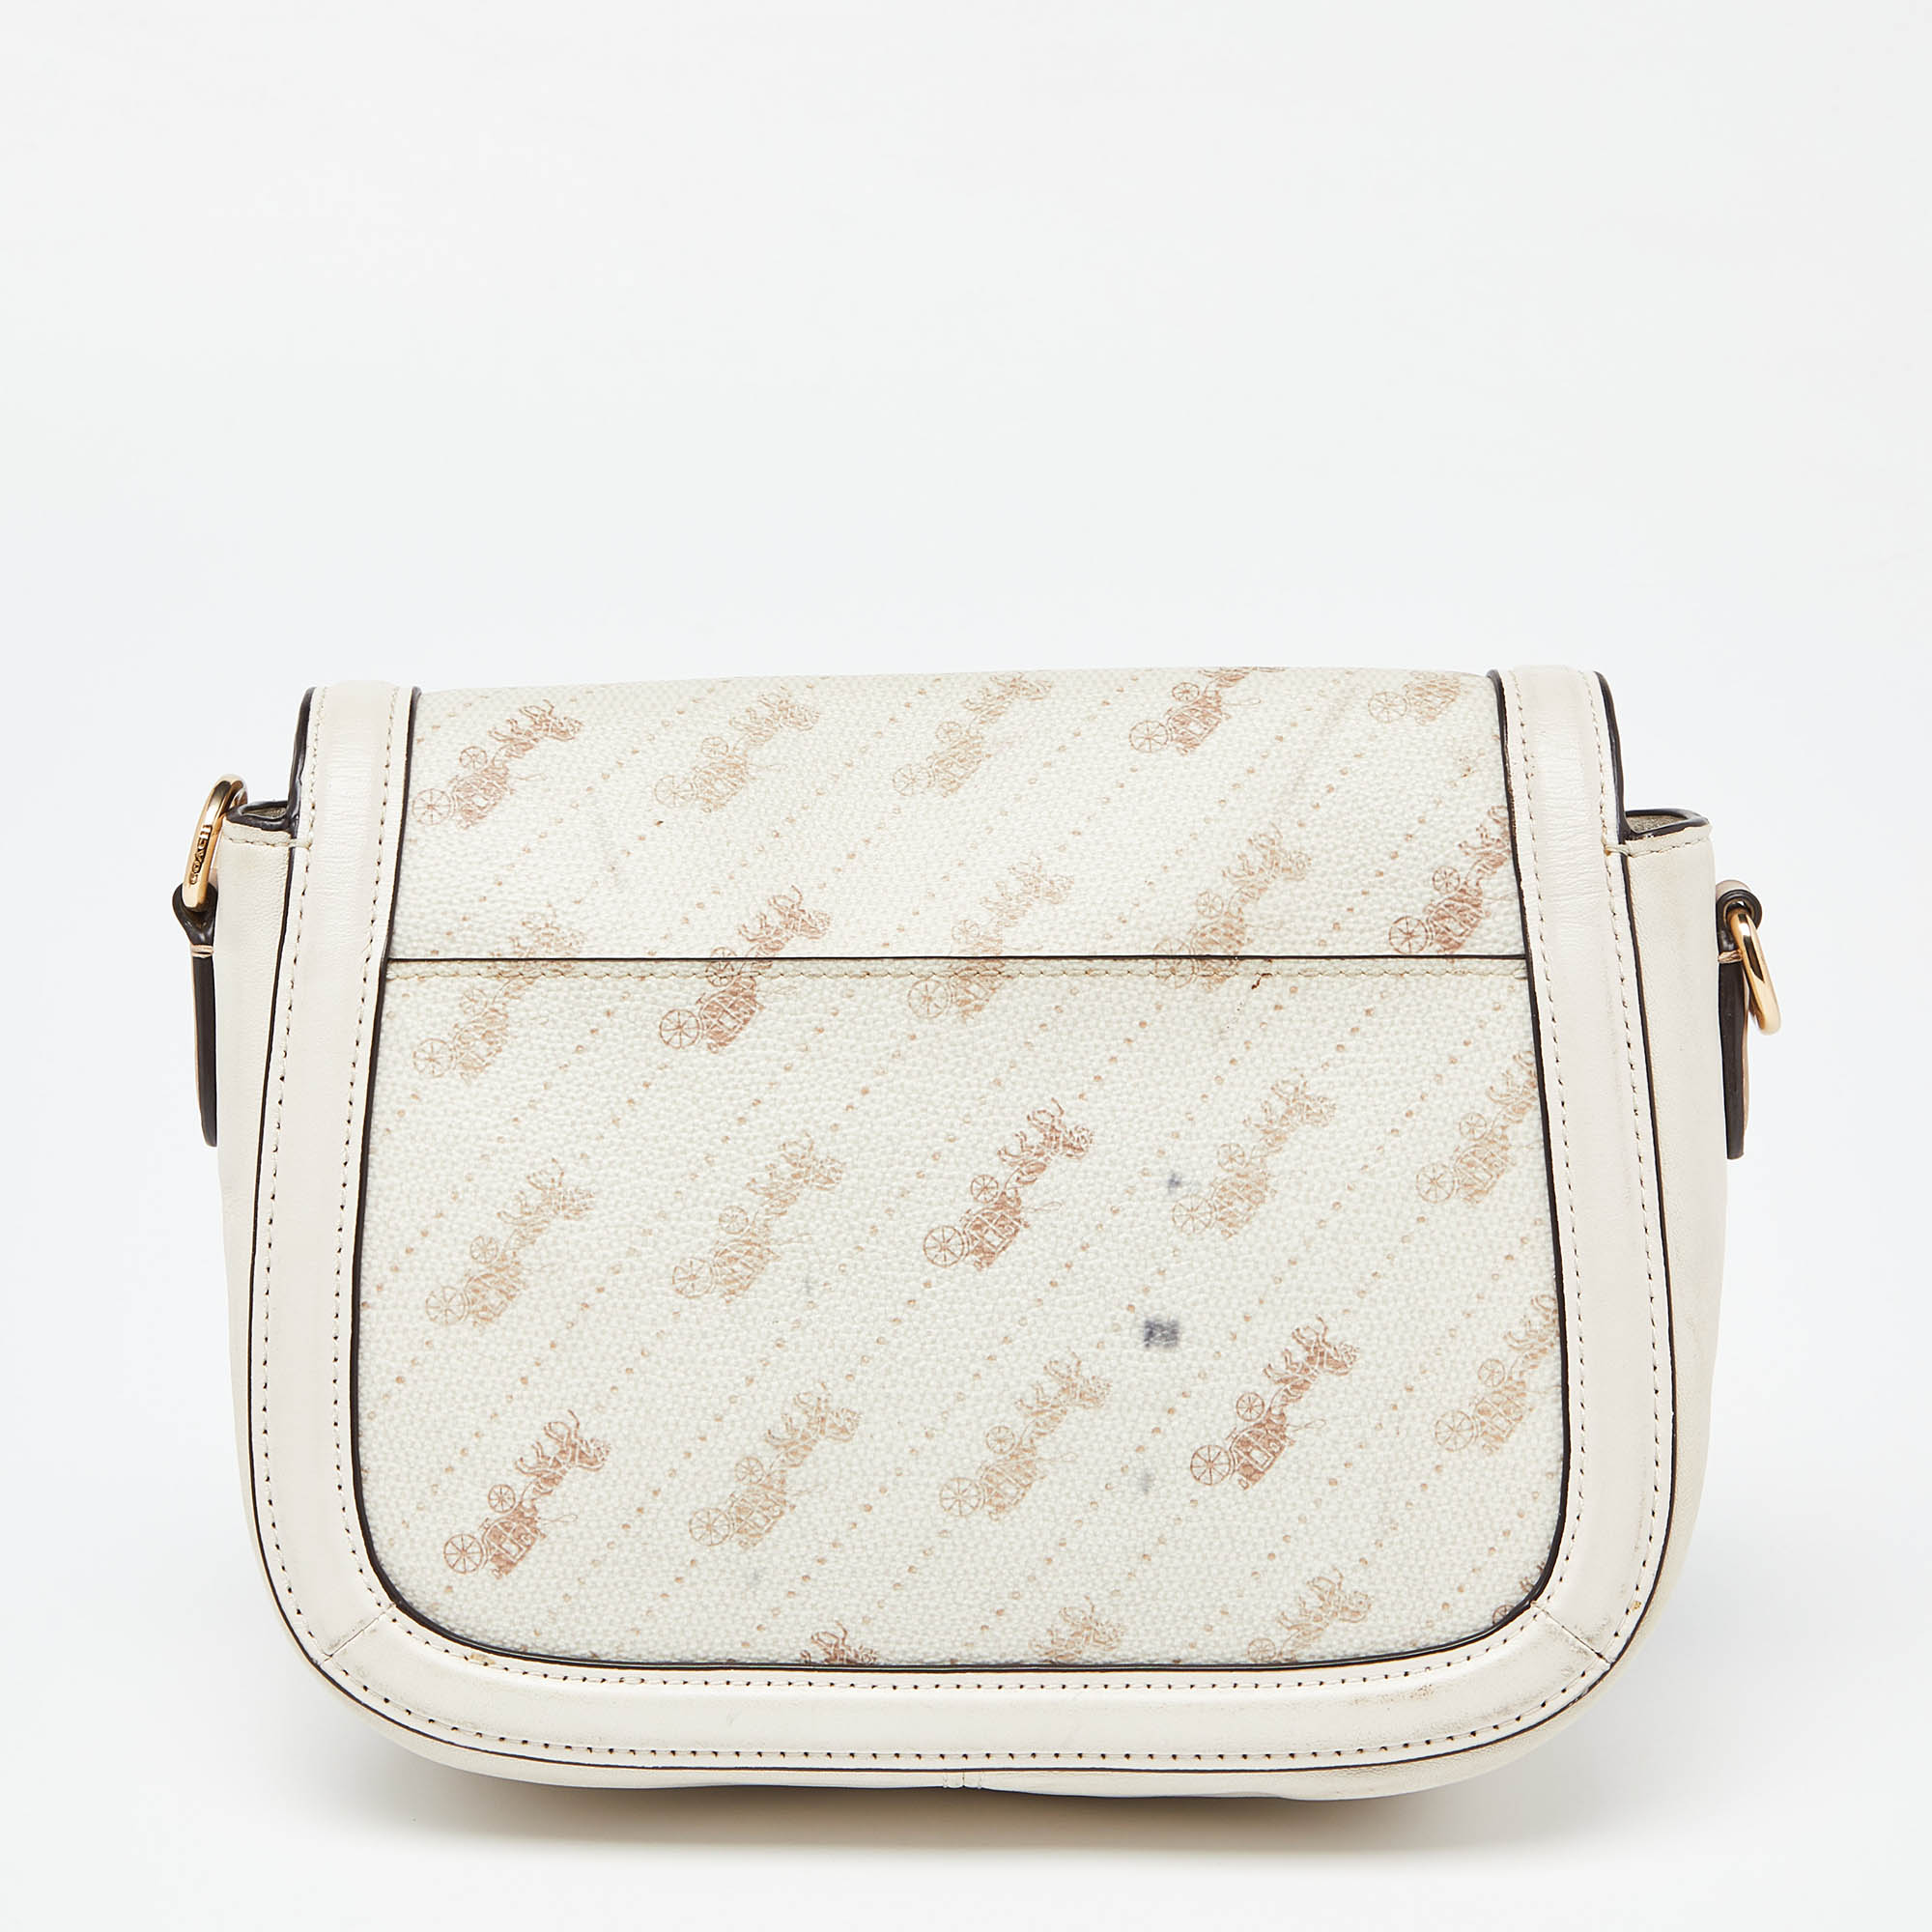 Coach Beige Horse Carriage Print Coated Canvas And Leather Crossbody Bag